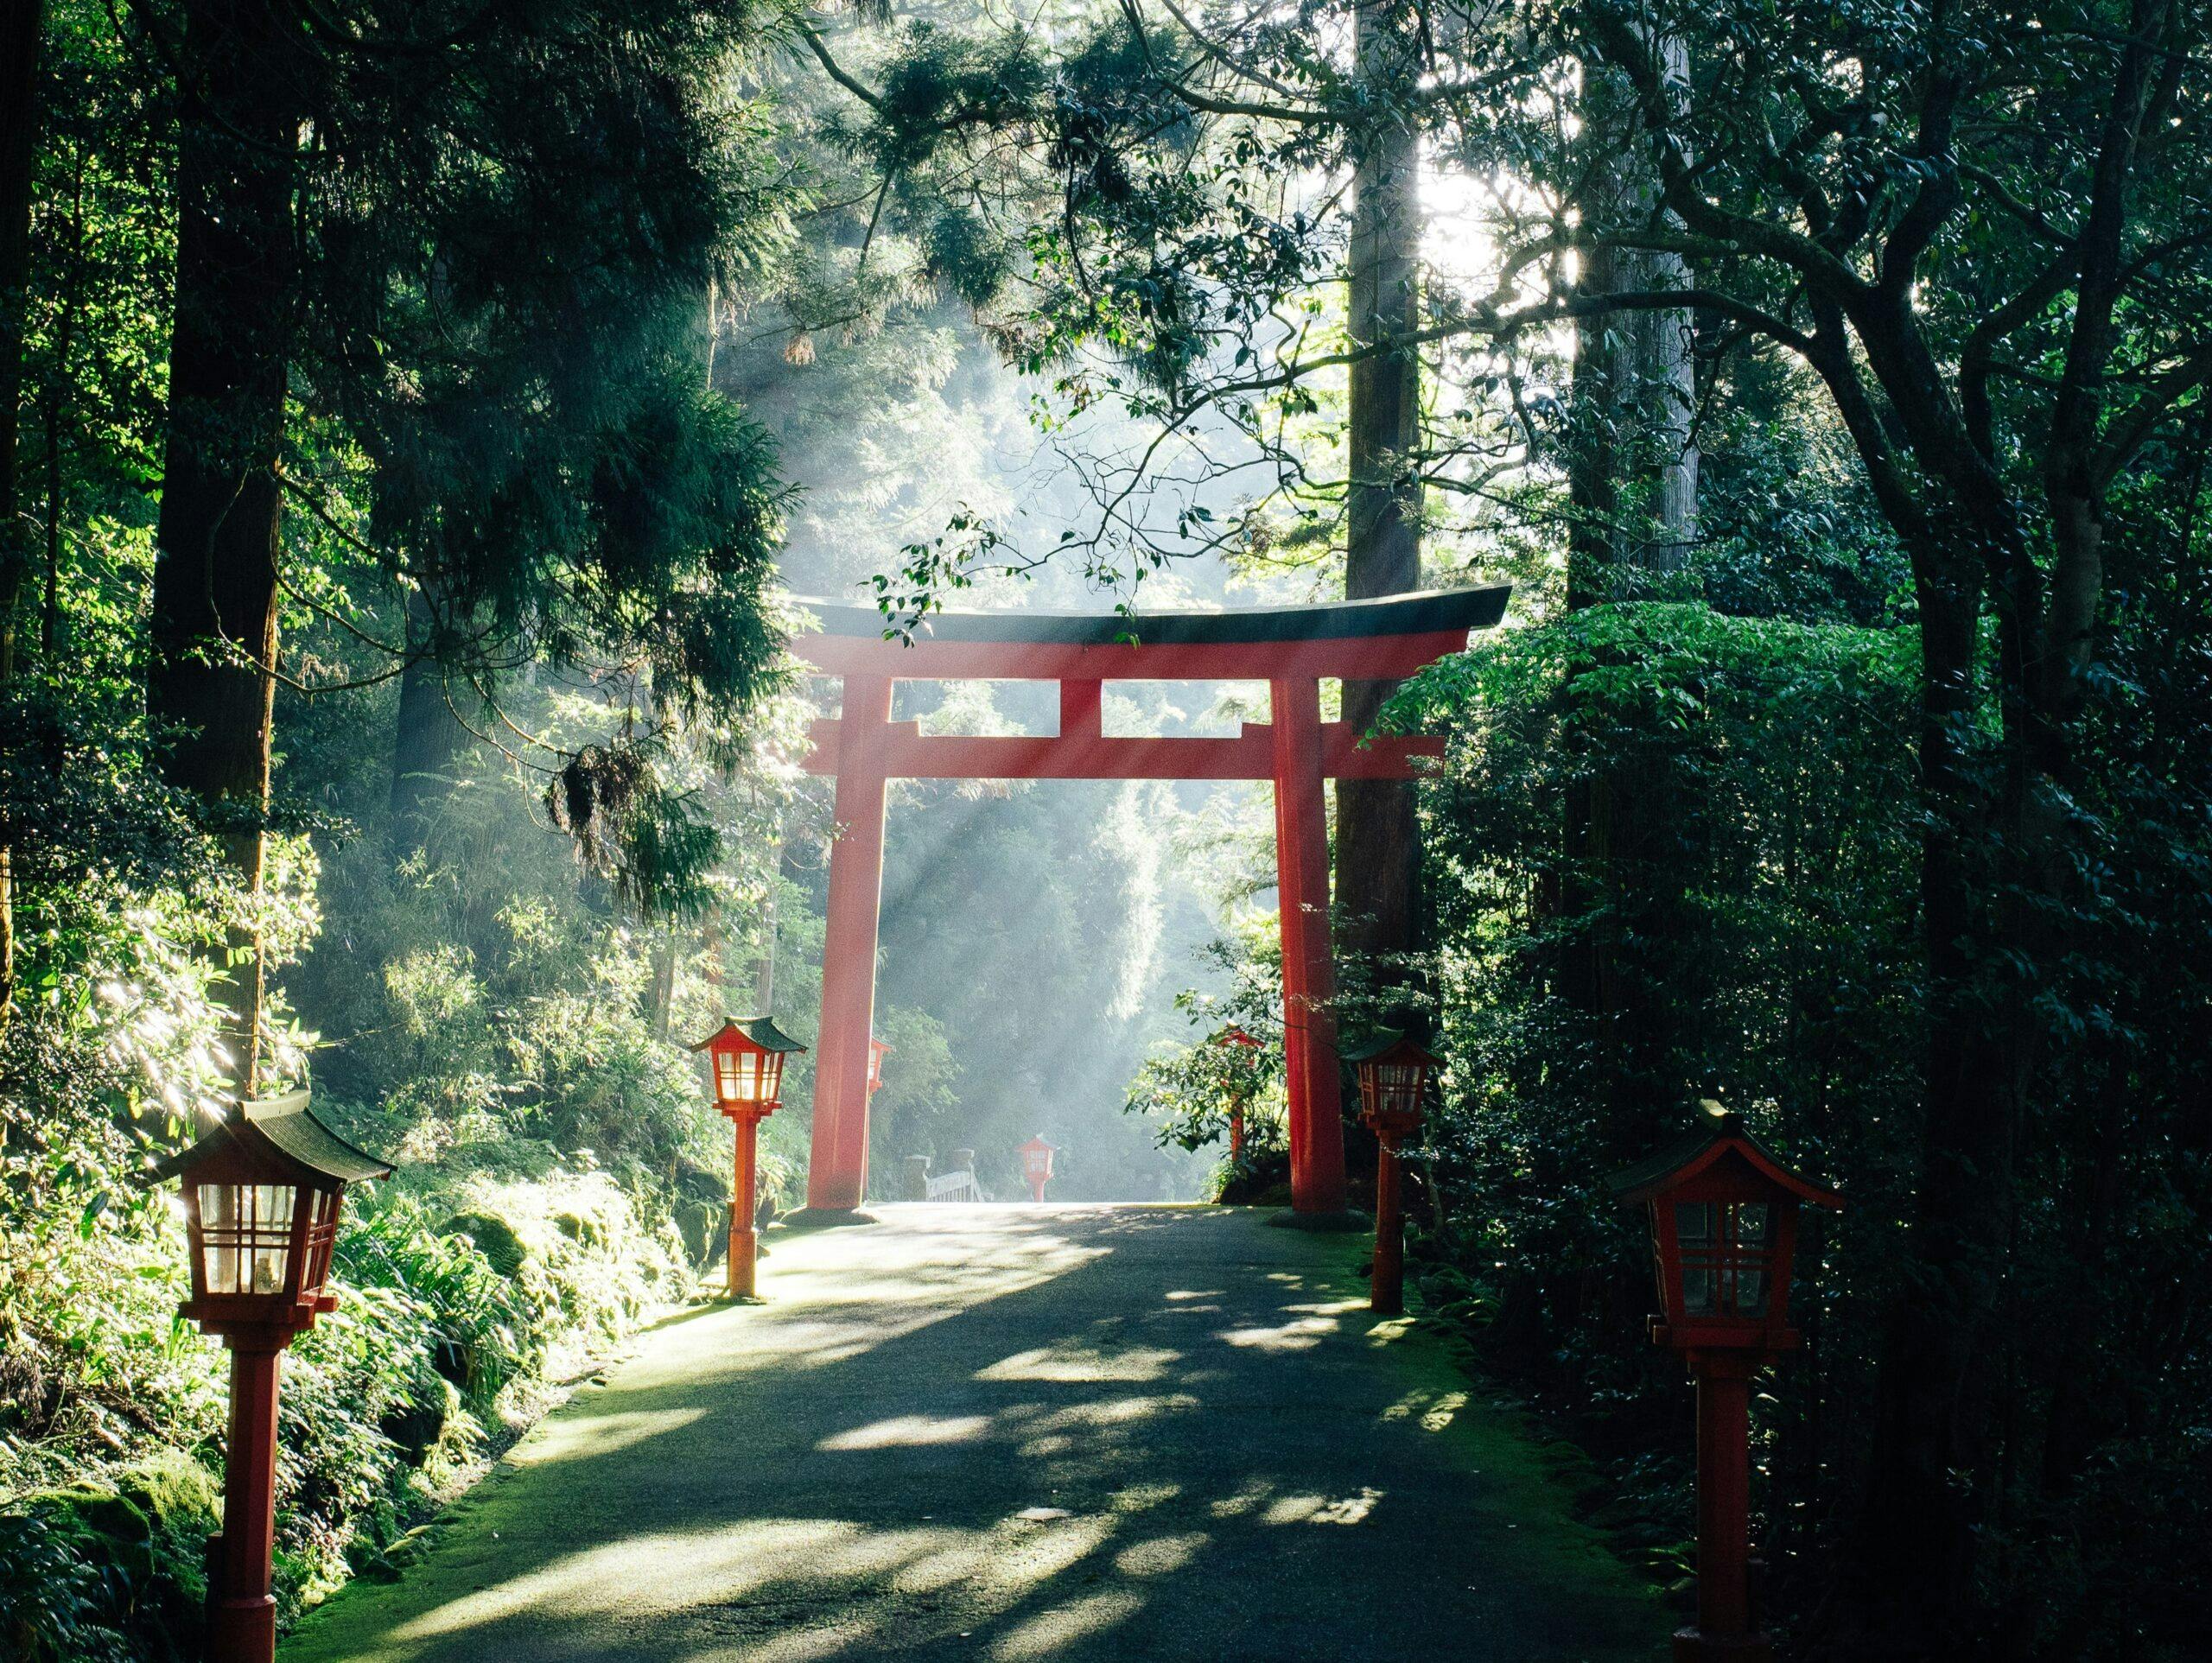 We're reimagining a fairer way to visit Japan